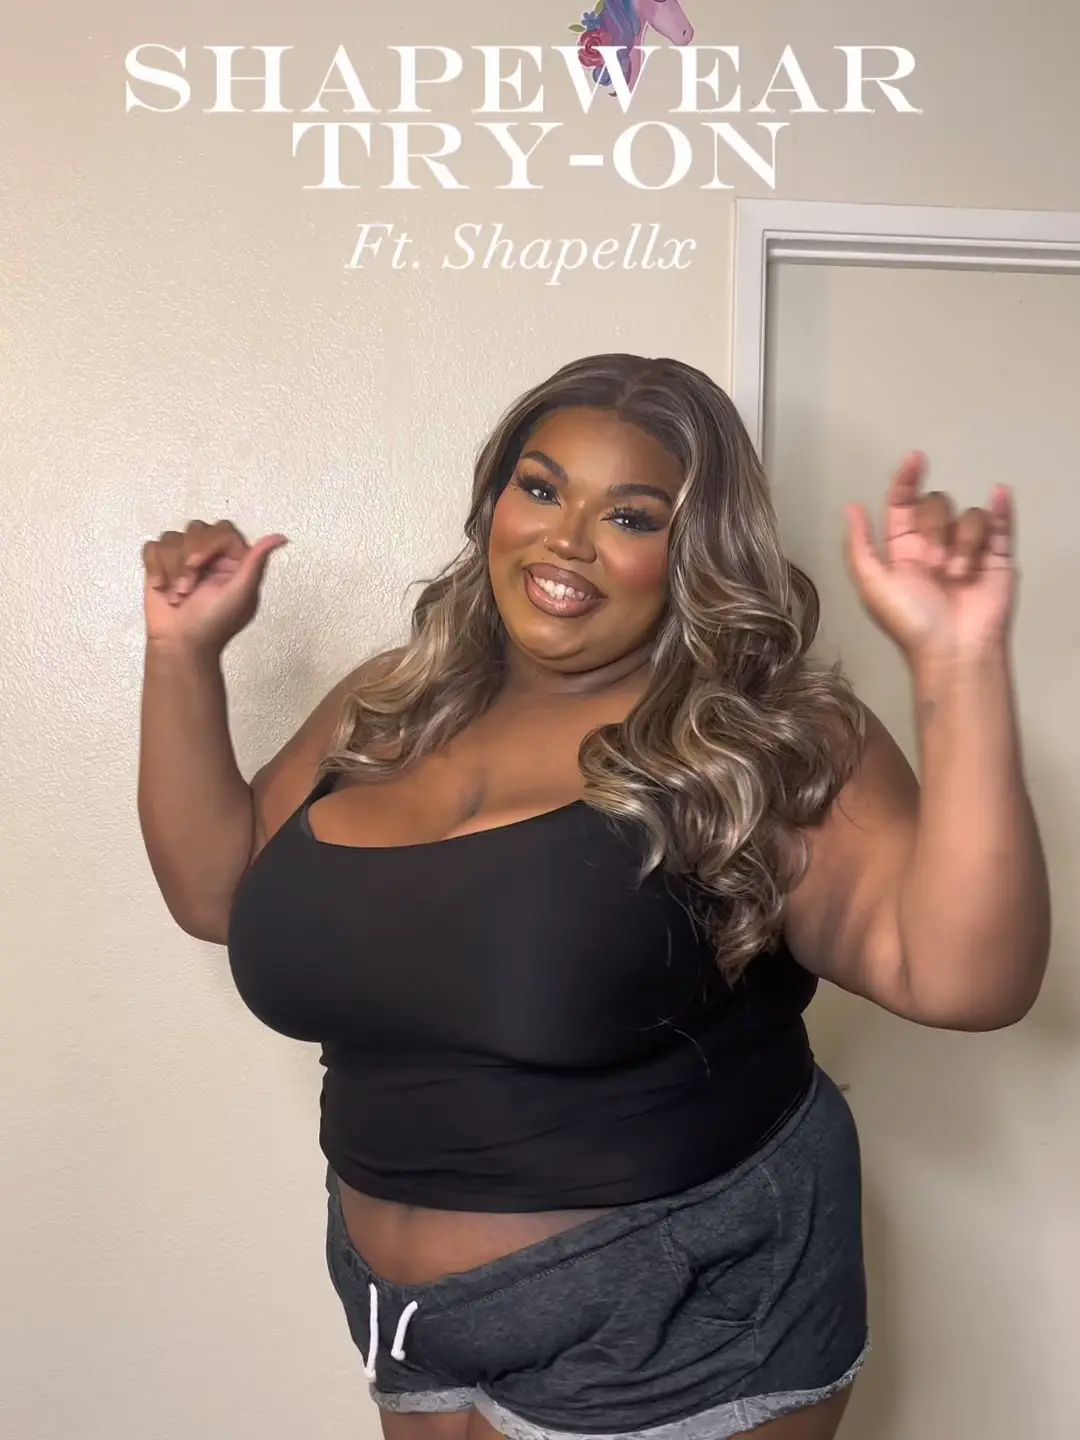 Shapellx Shapewear Try-On🤍, Video published by Lauren Madison✨